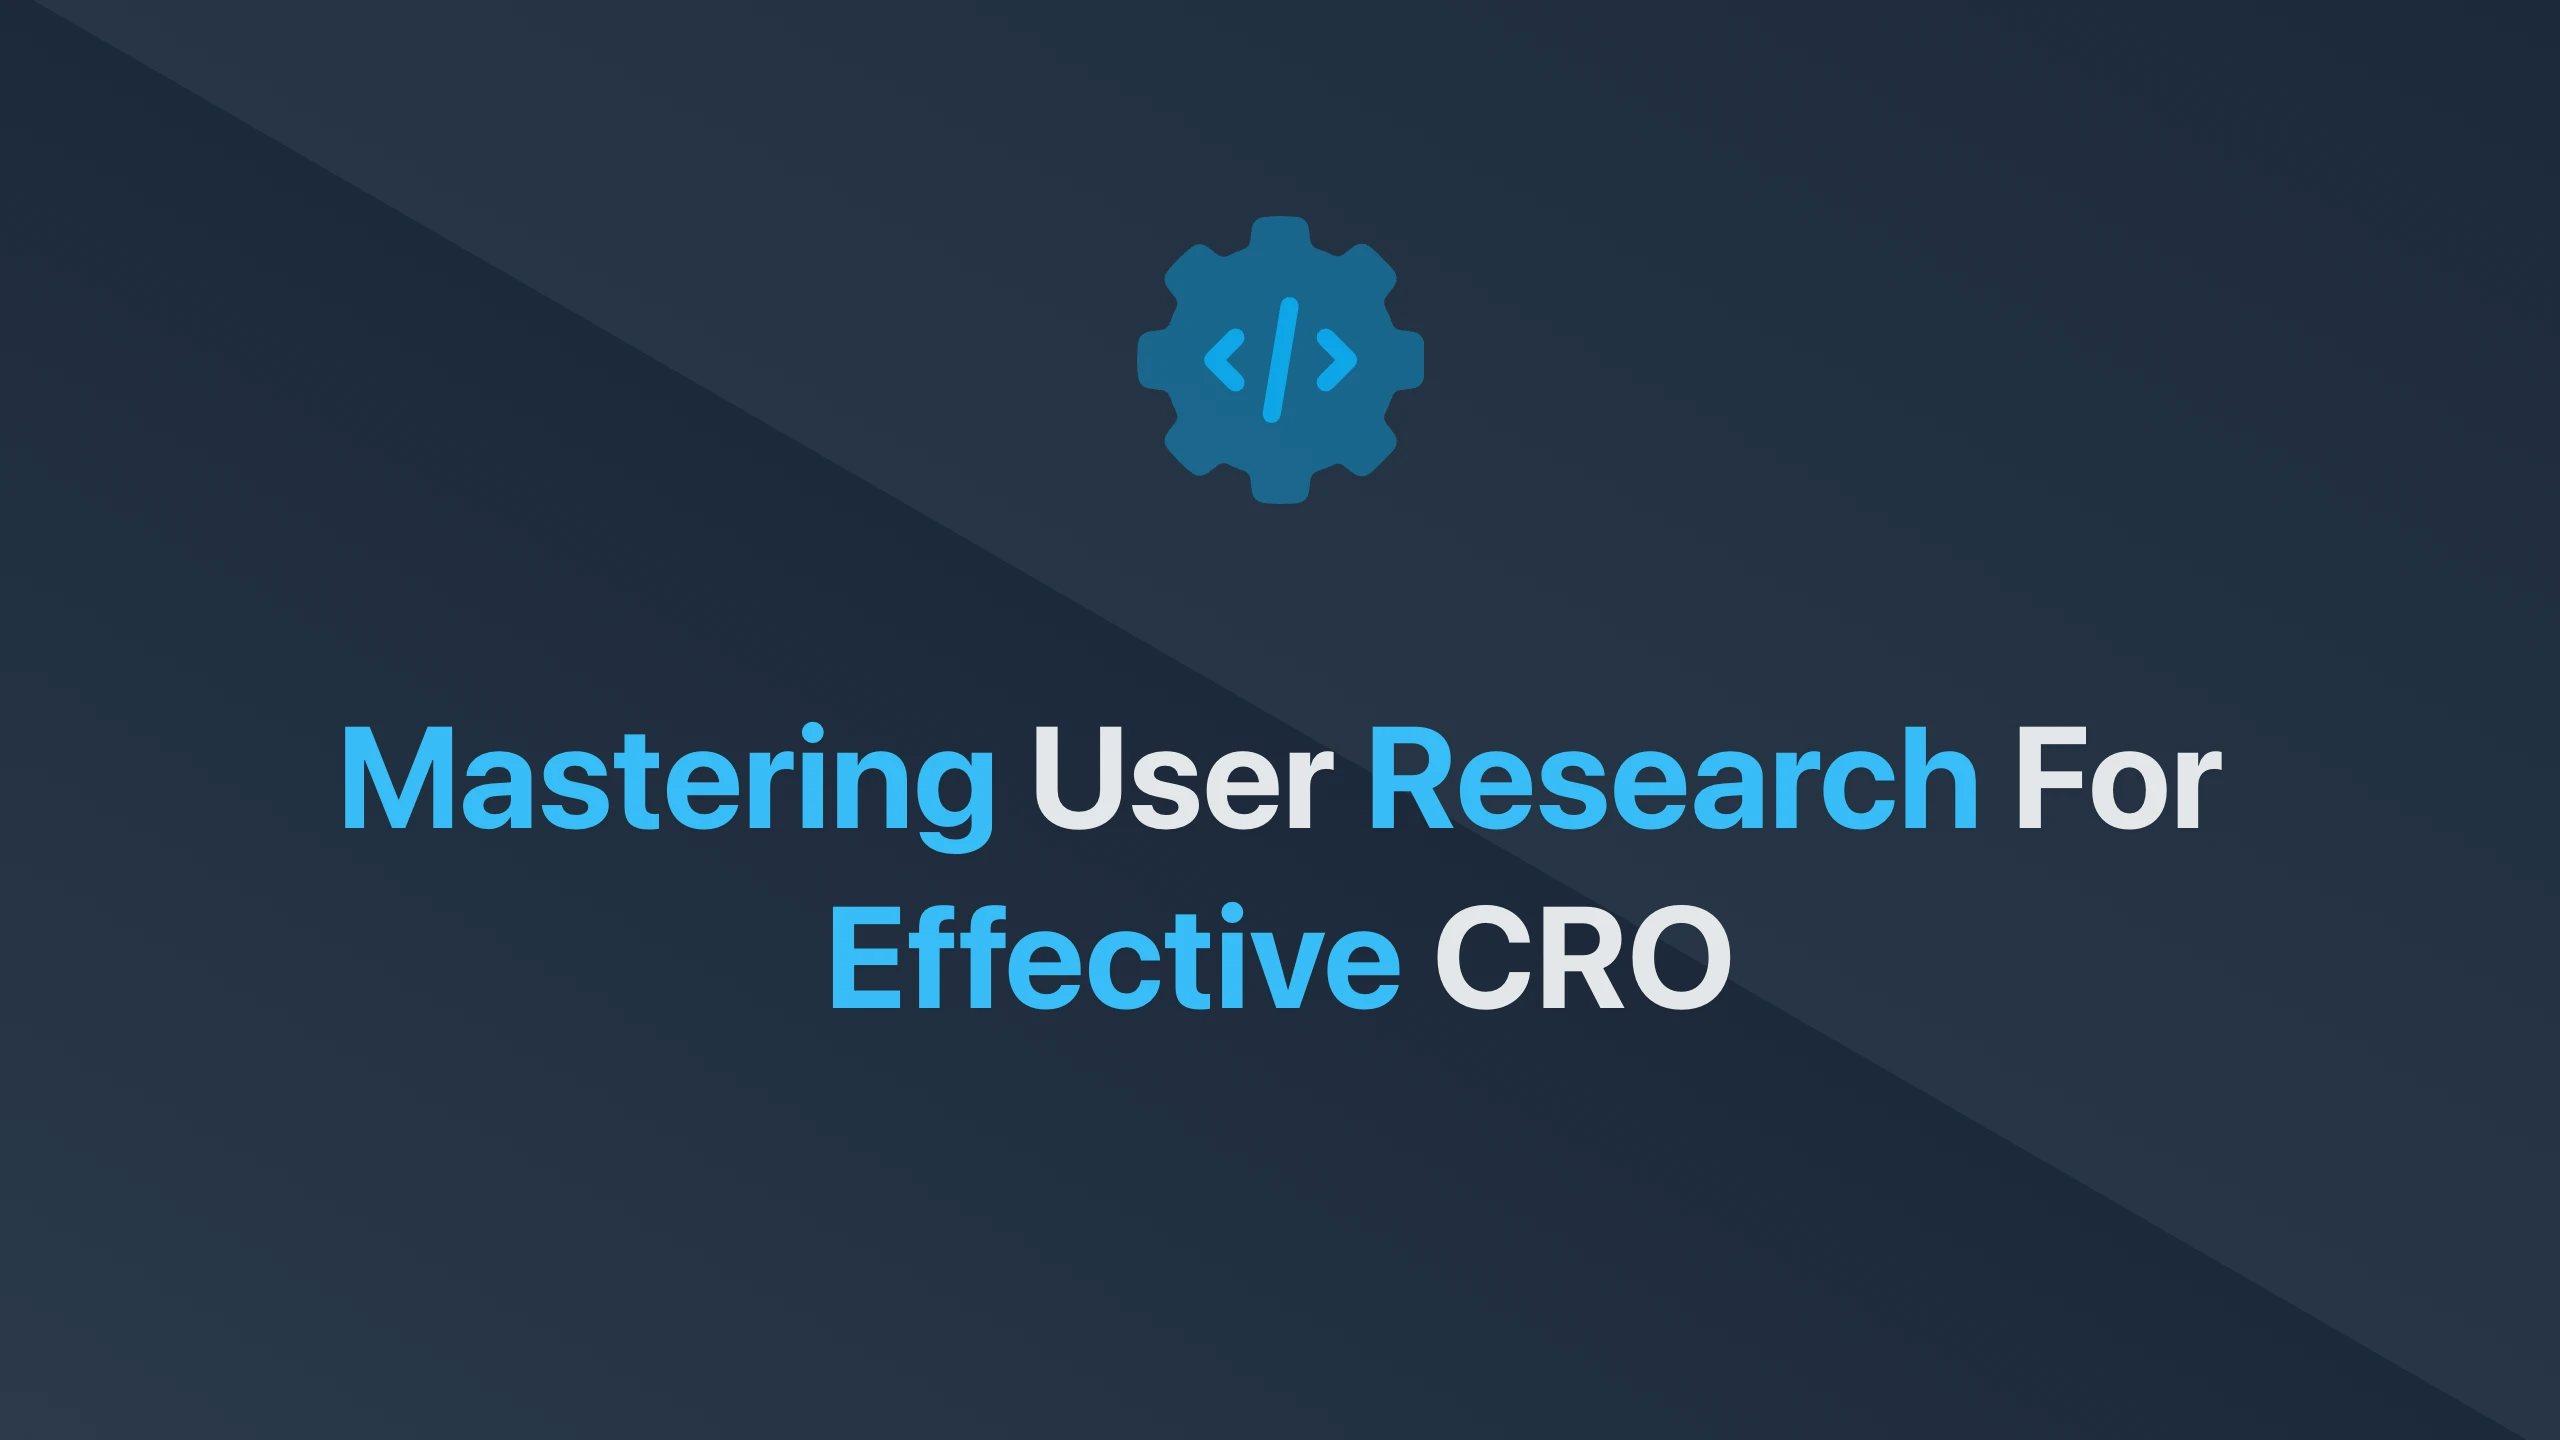 Cover Image for Mastering User Research for Effective CRO